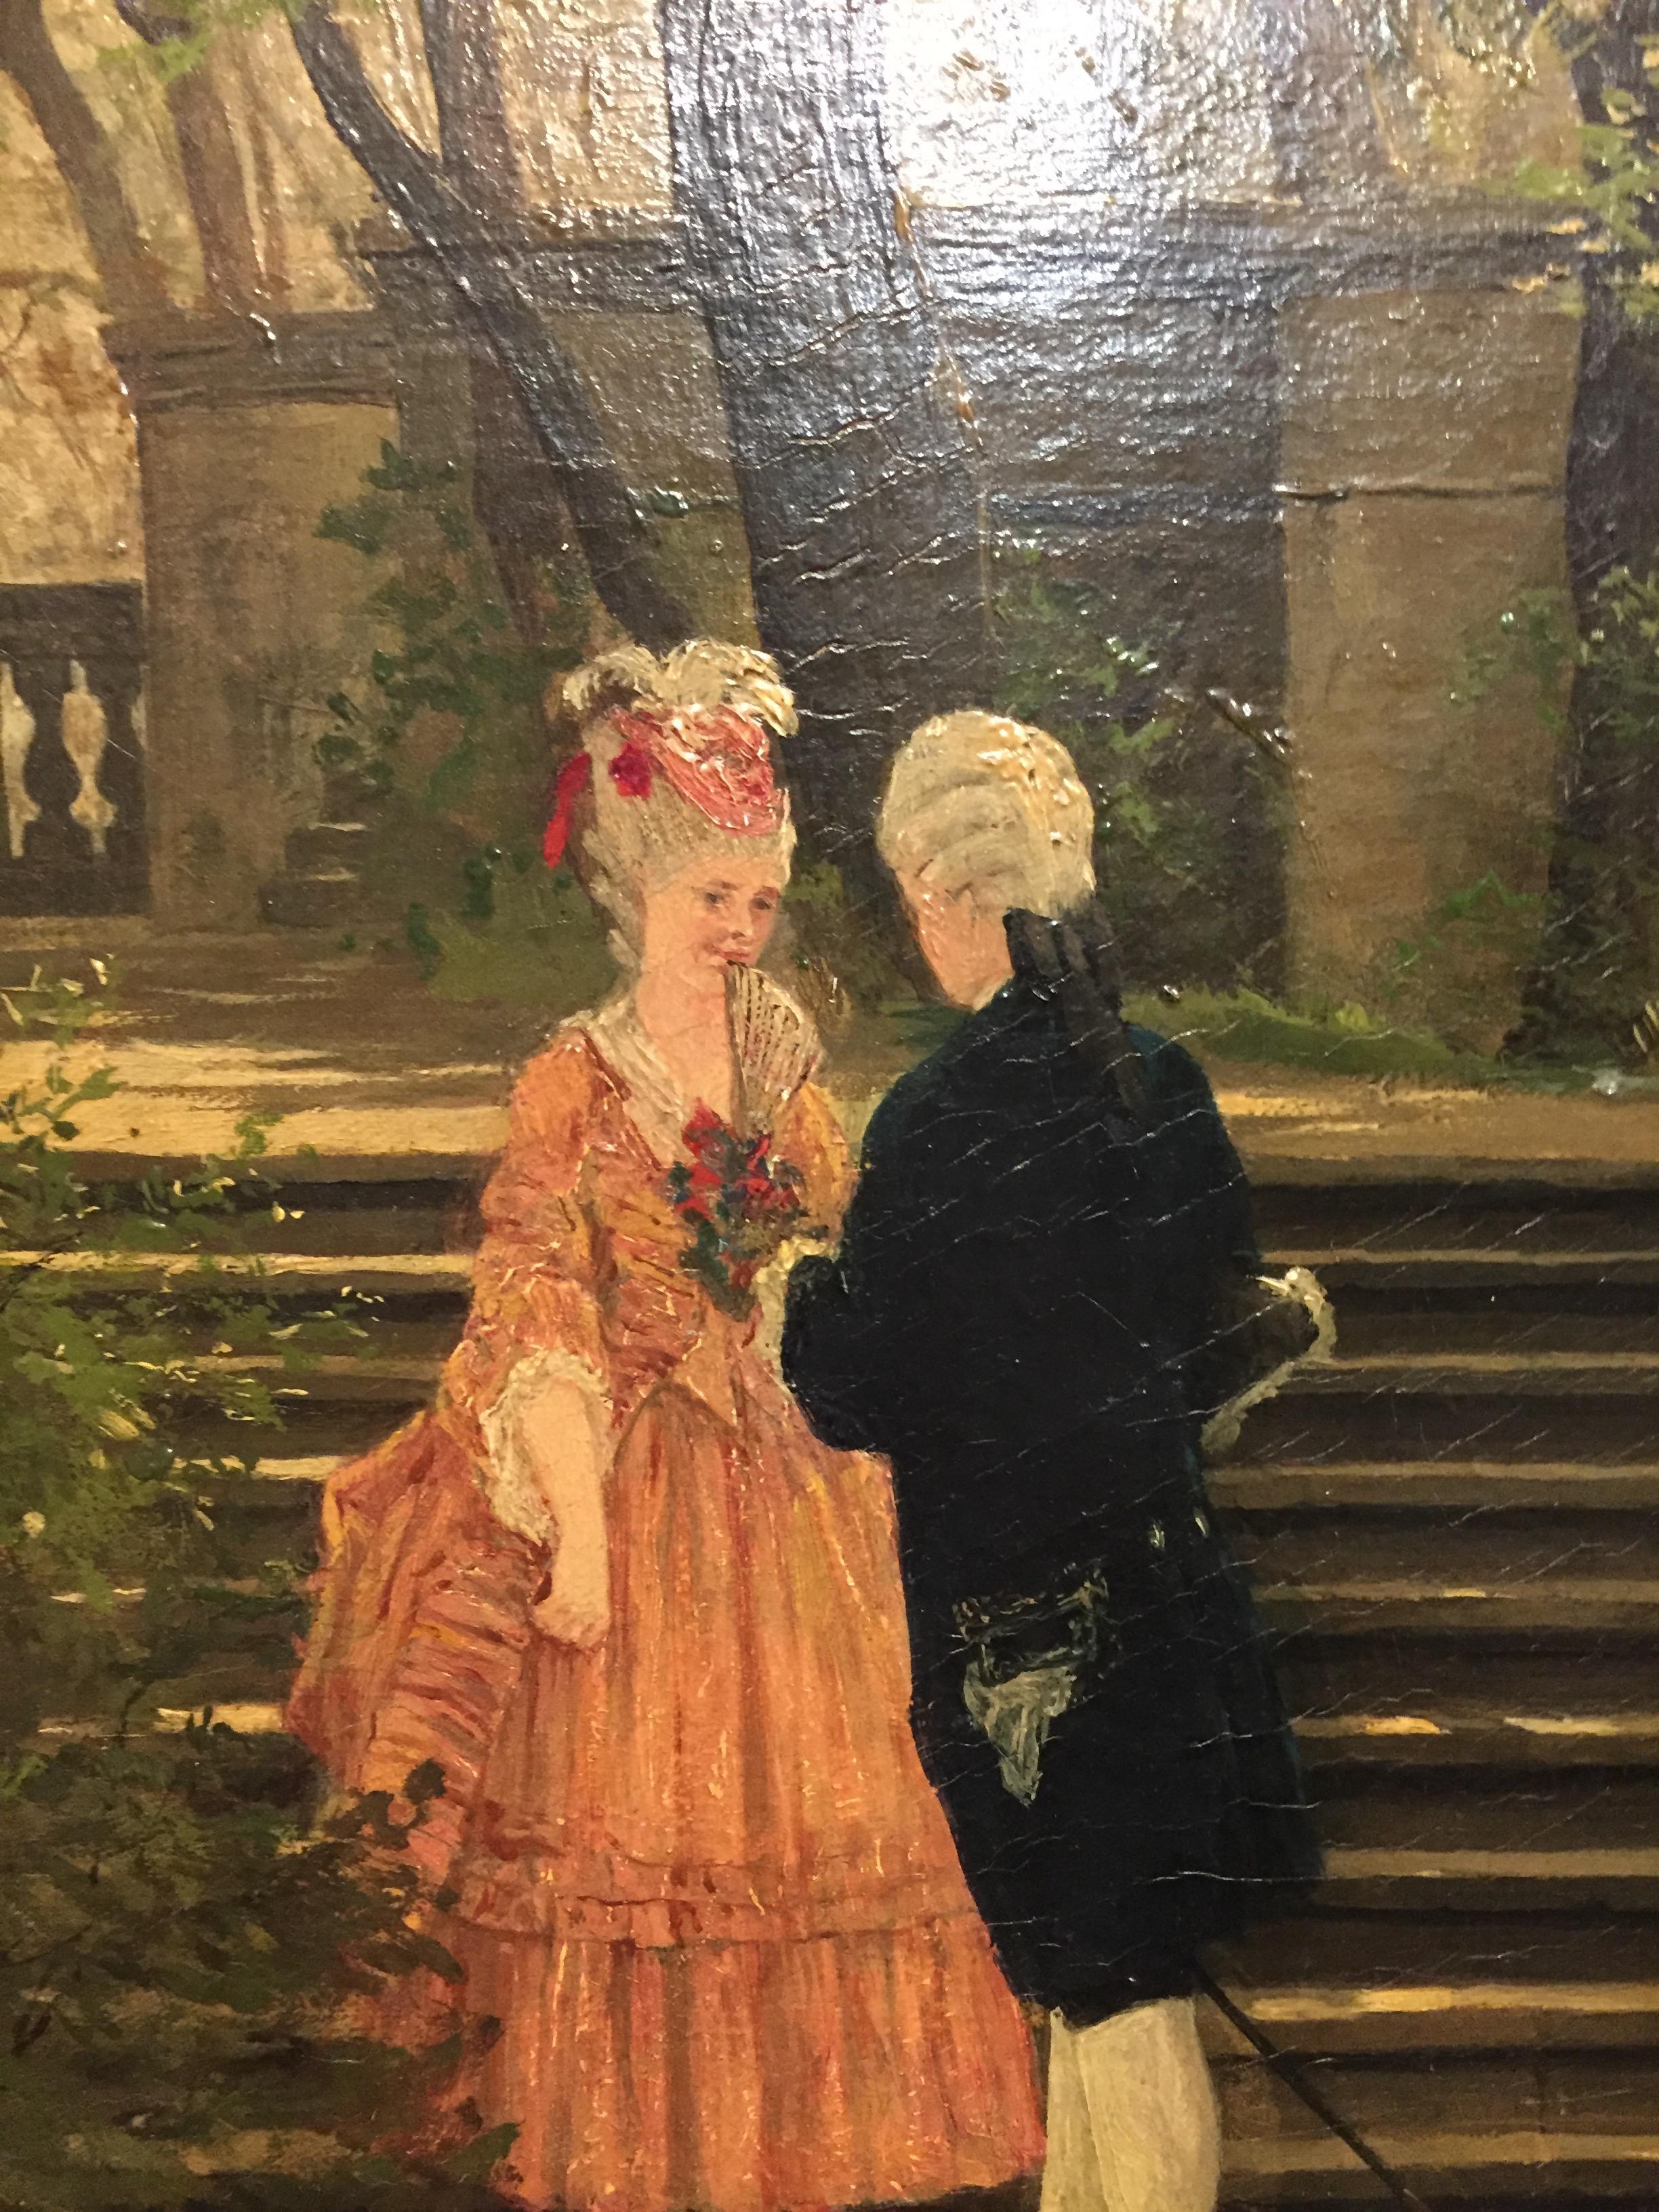 Oil Painting by P. F. Flickel in the Castle Garden 2